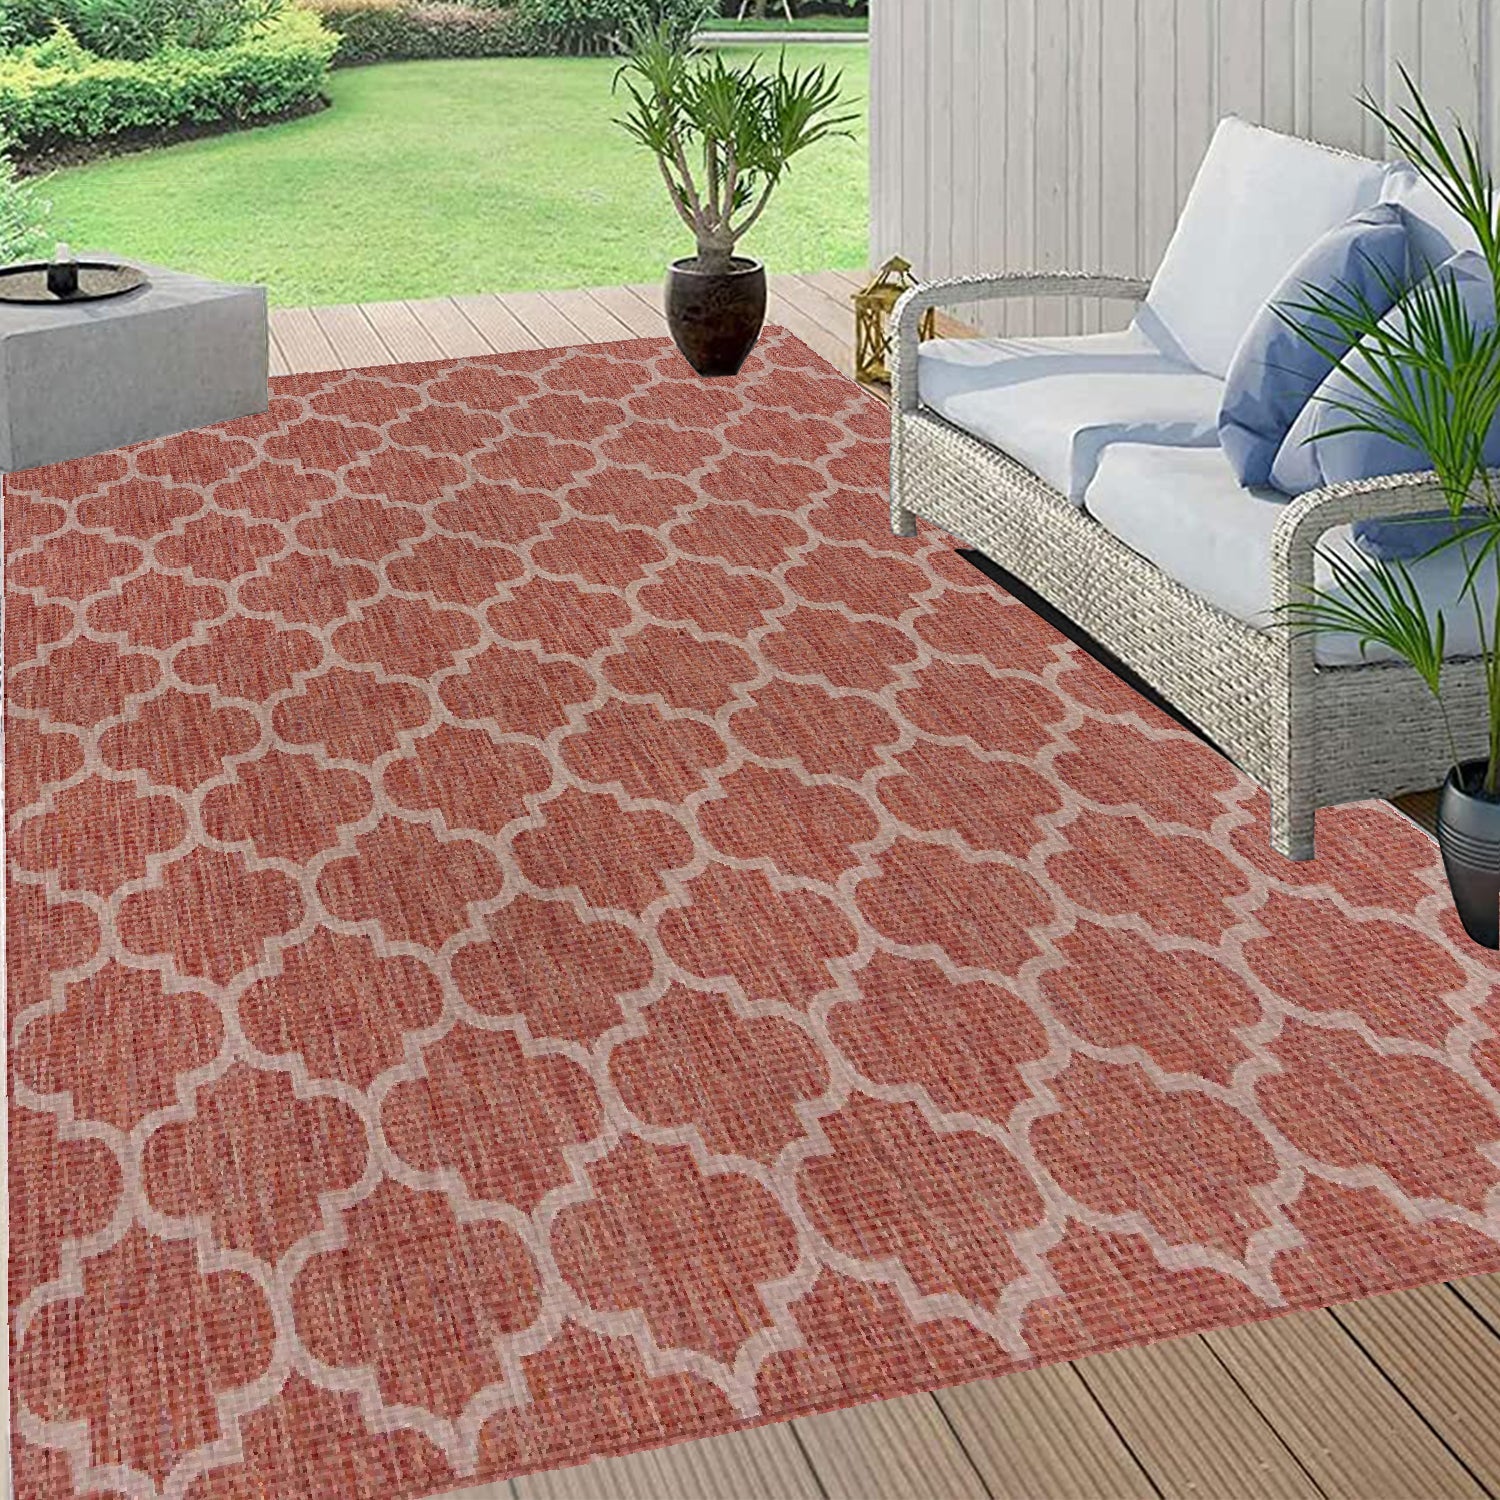 https://www.kgorge.com/cdn/shop/products/Outdoor-Rug-Modern-Area-Rug-Large-Floor-Mat-and-Rug-for-Outdoors-Patio-Backyard-Deck-KGORGE-Store-69.jpg?v=1680110396